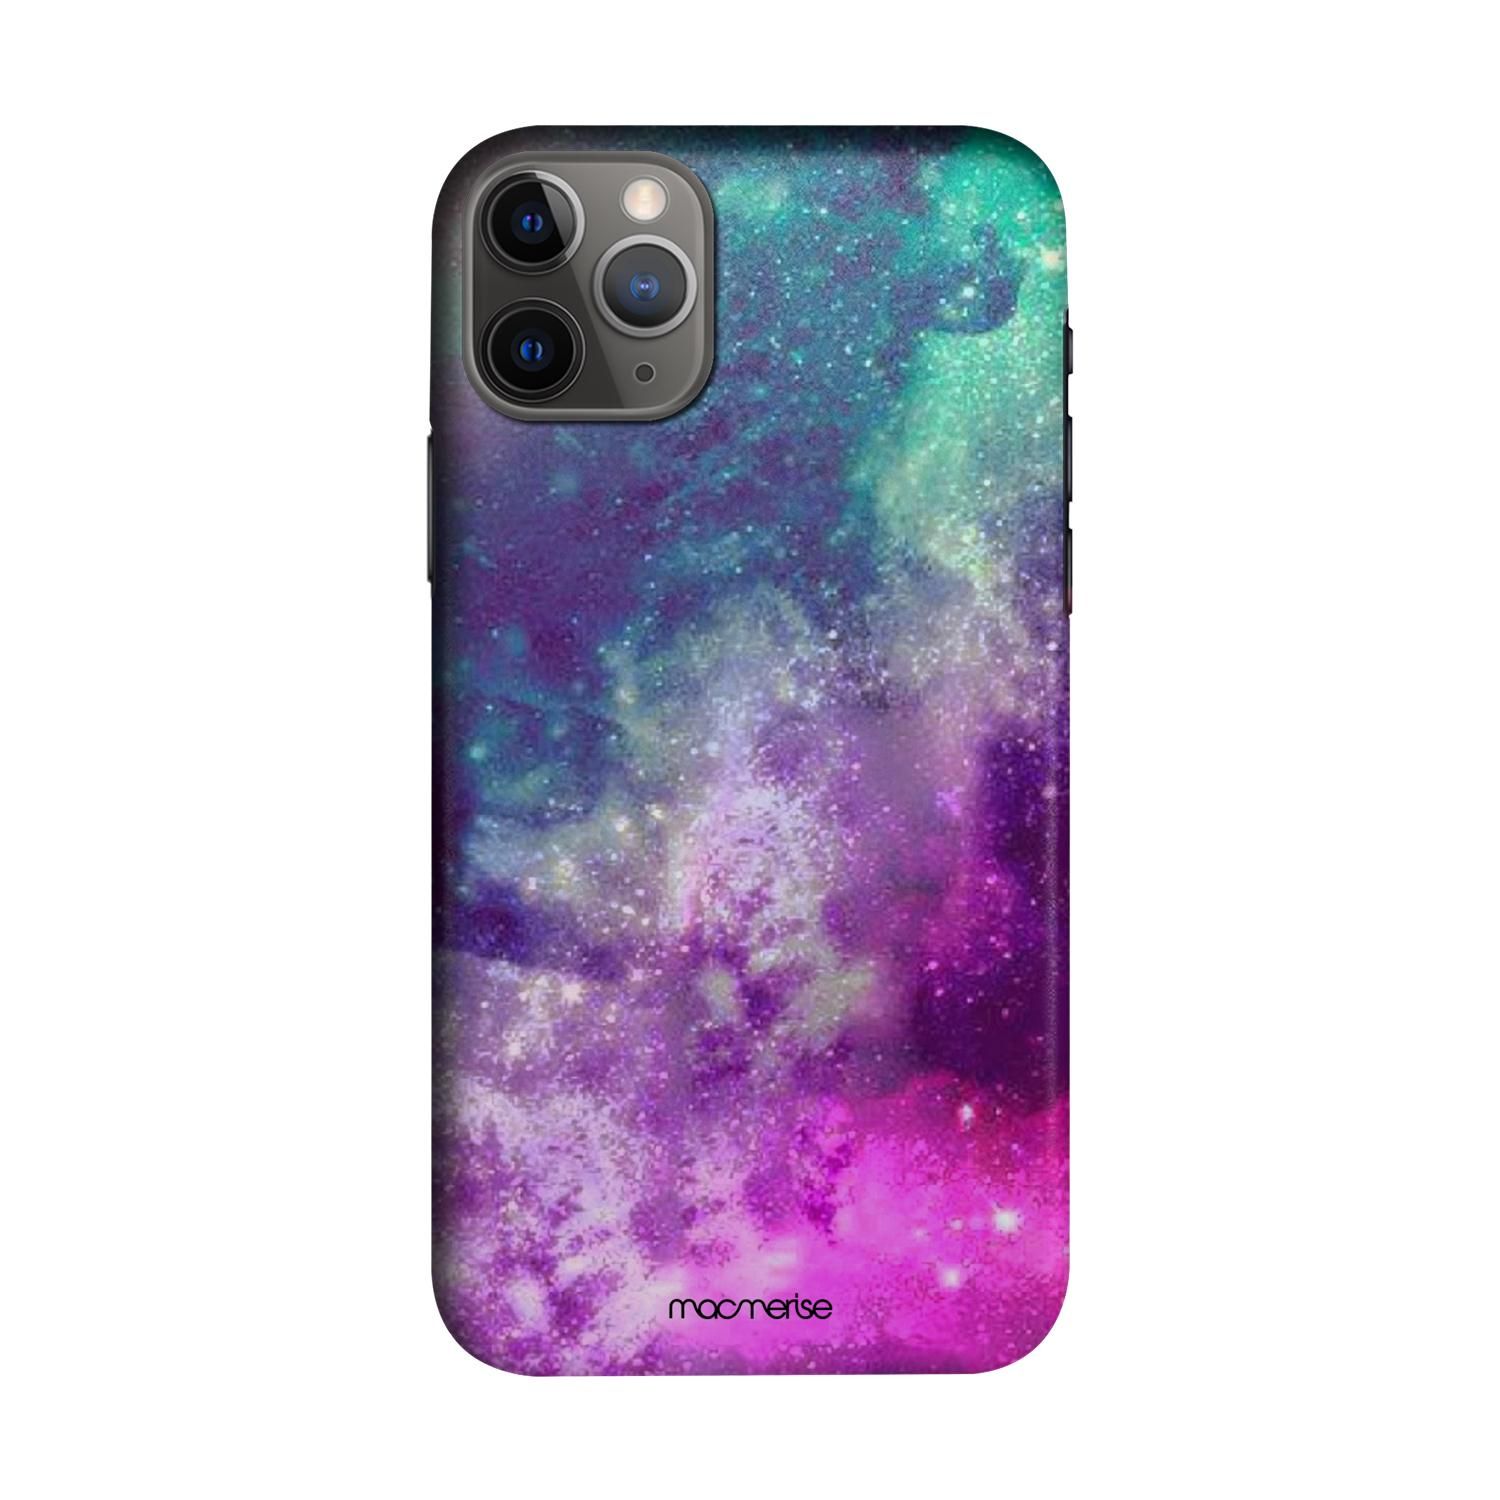 Buy The Twilight Effect - Sleek Phone Case for iPhone 11 Pro Max Online